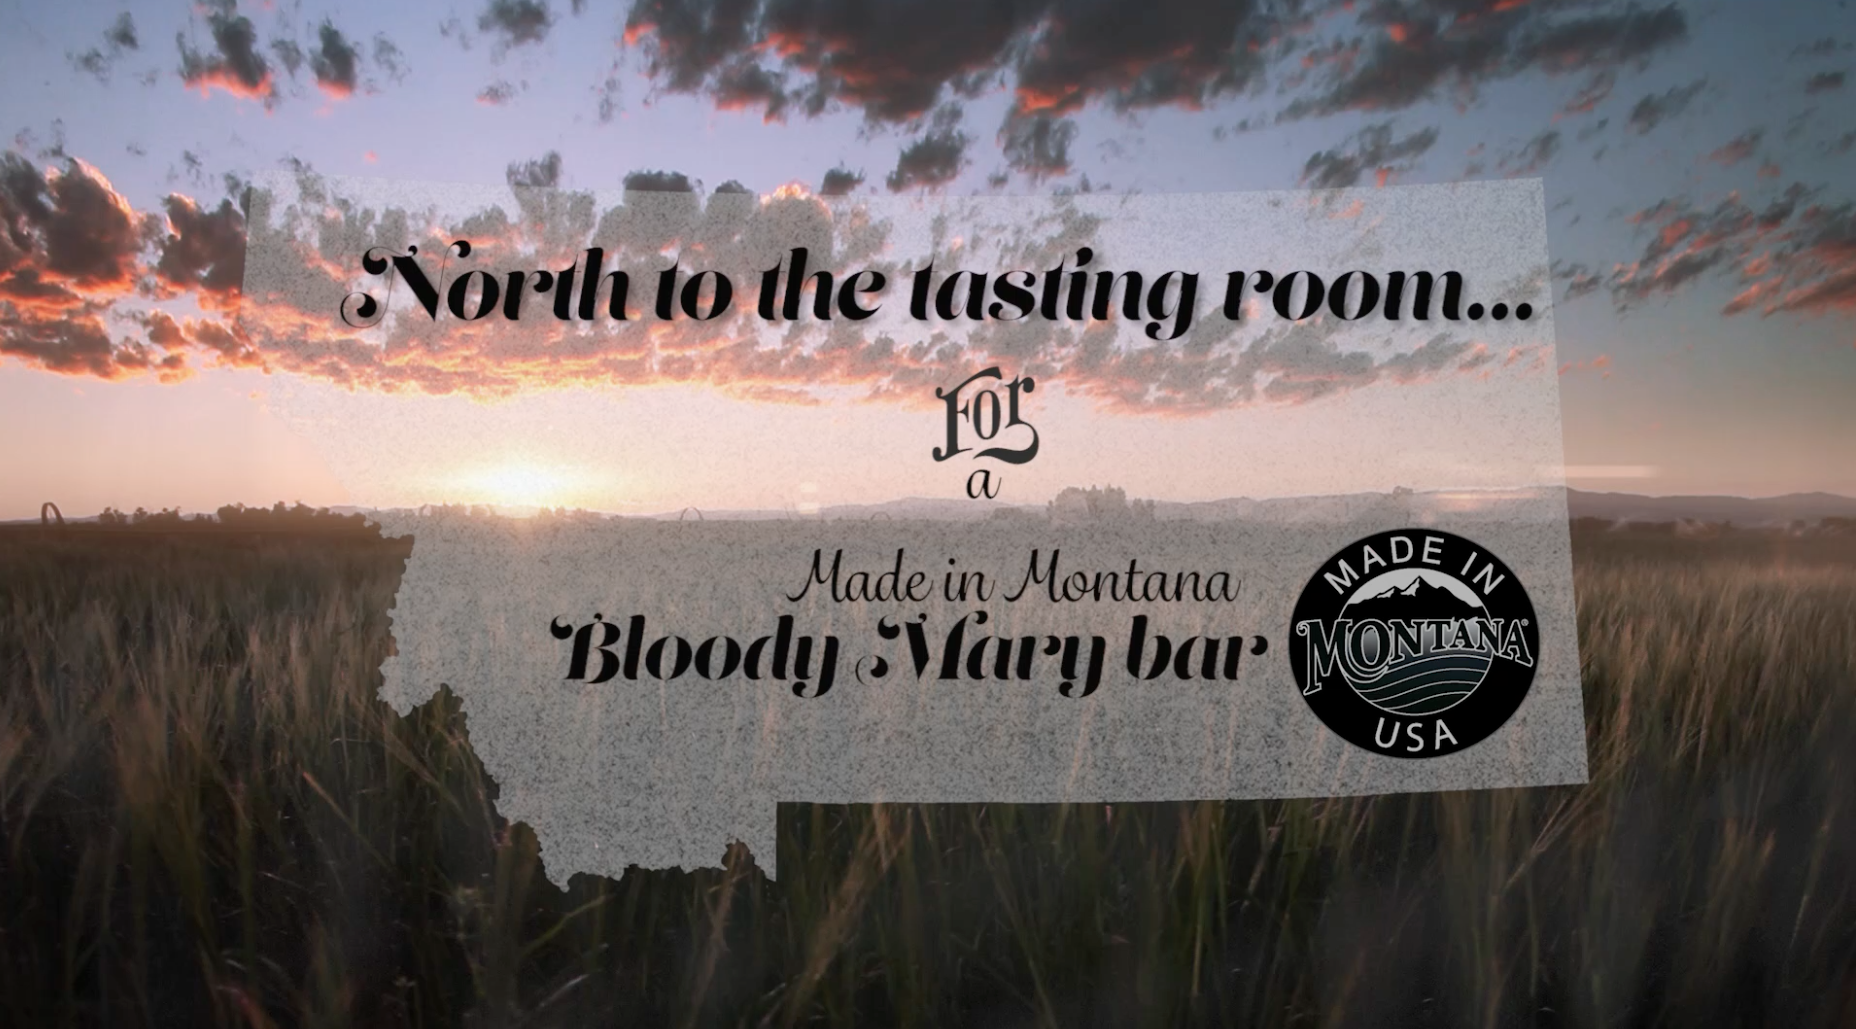 North to the tasting room at Trailhead Spirits in Billings, Montana for a Made in Montana Bloody Mary bar with Parker's Hangover Tonic.